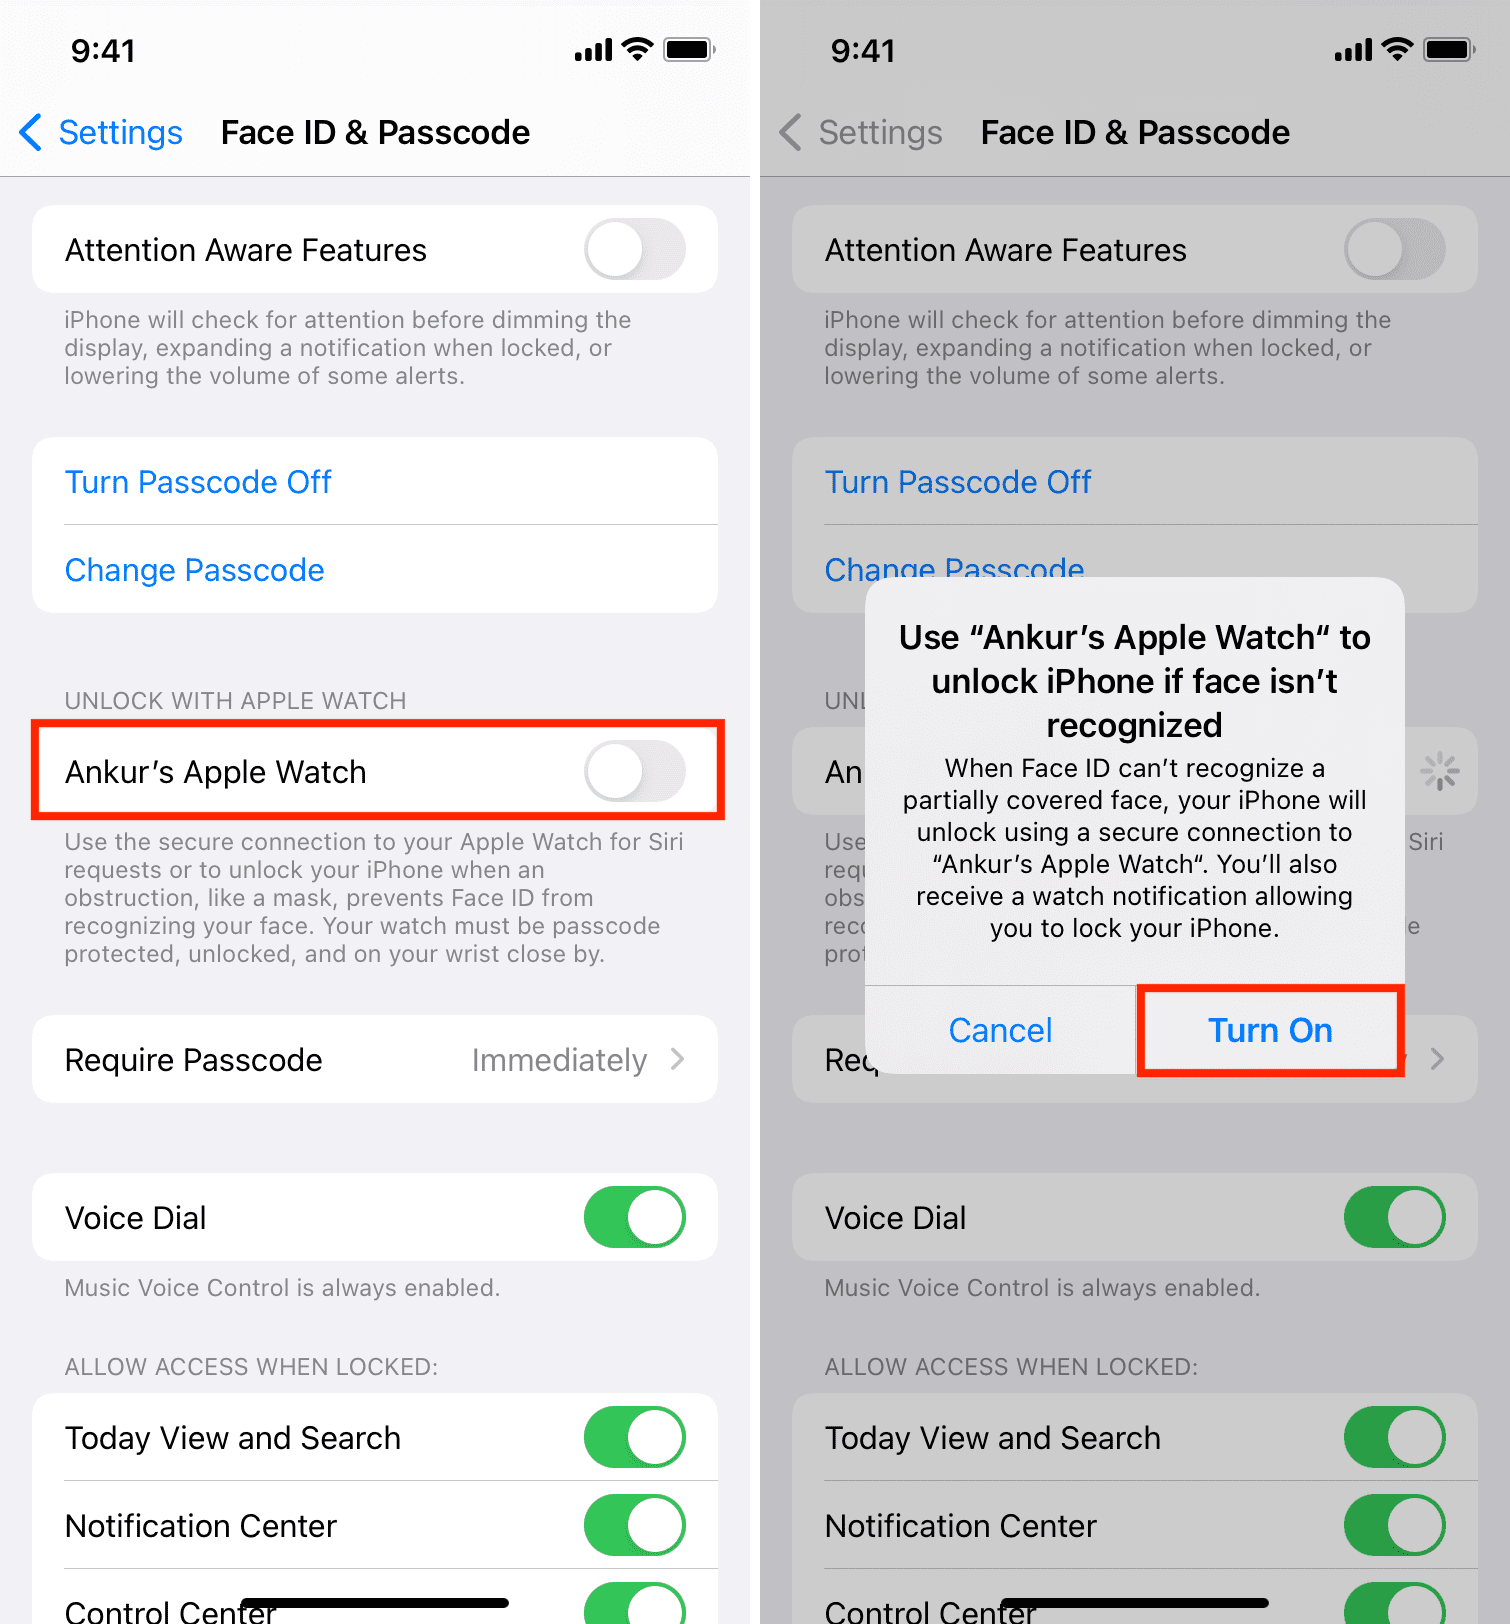 Disable and enable Unlock with Apple Watch to fix the issue